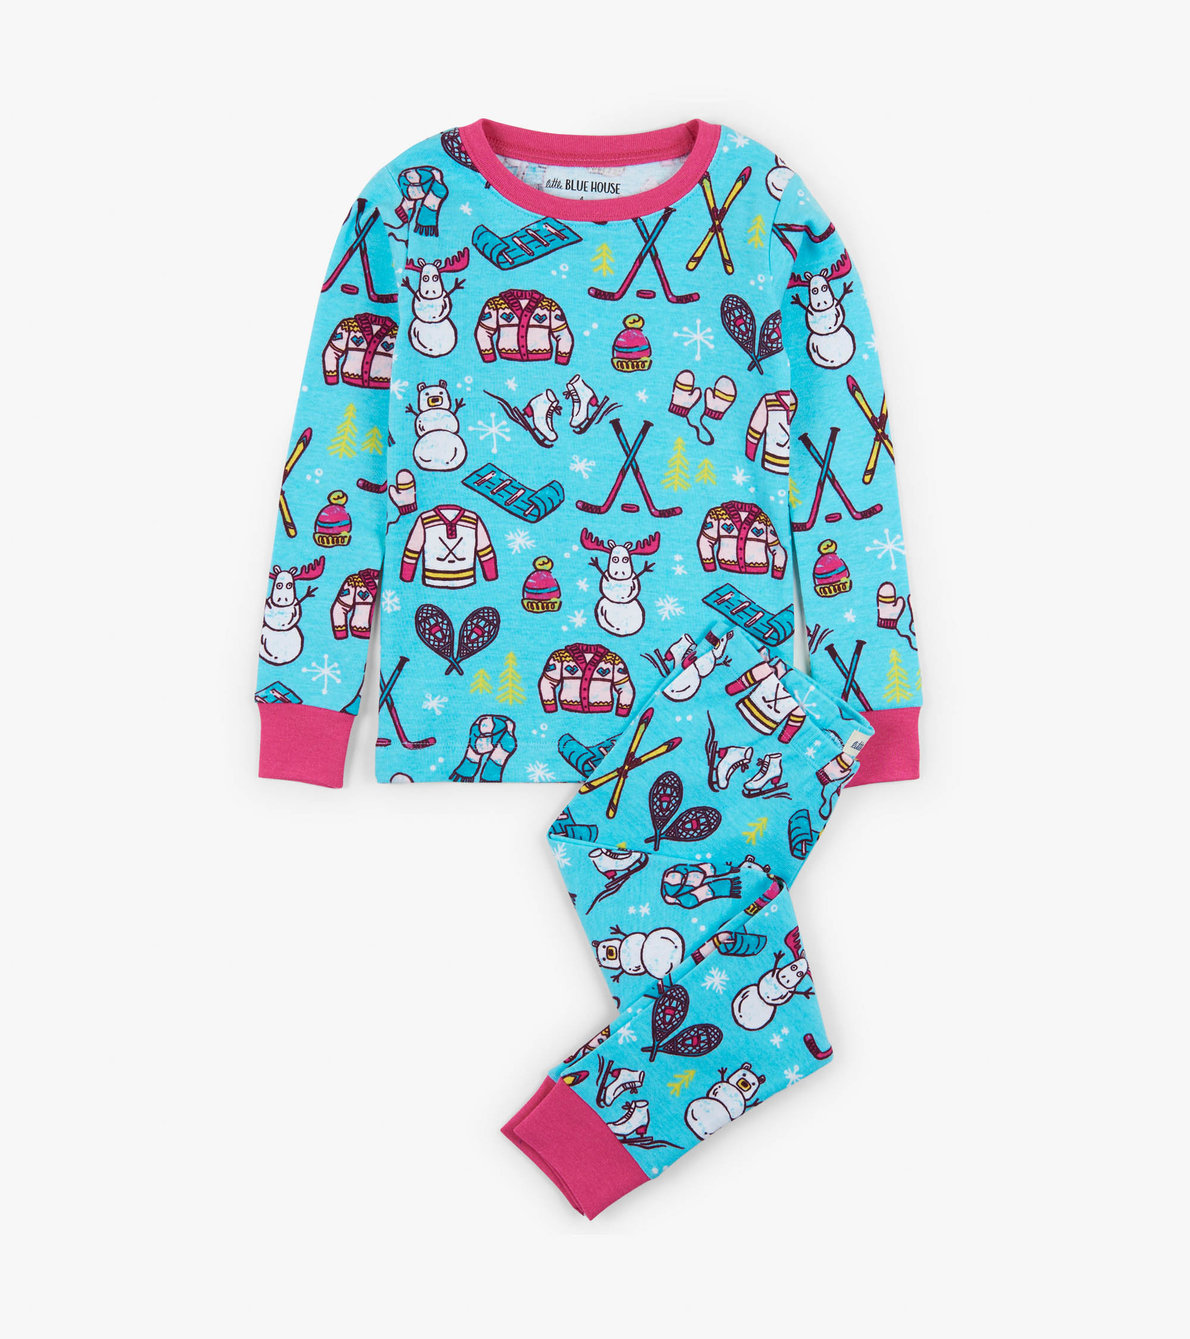 View larger image of Winter Traditions Kids Pajama Set